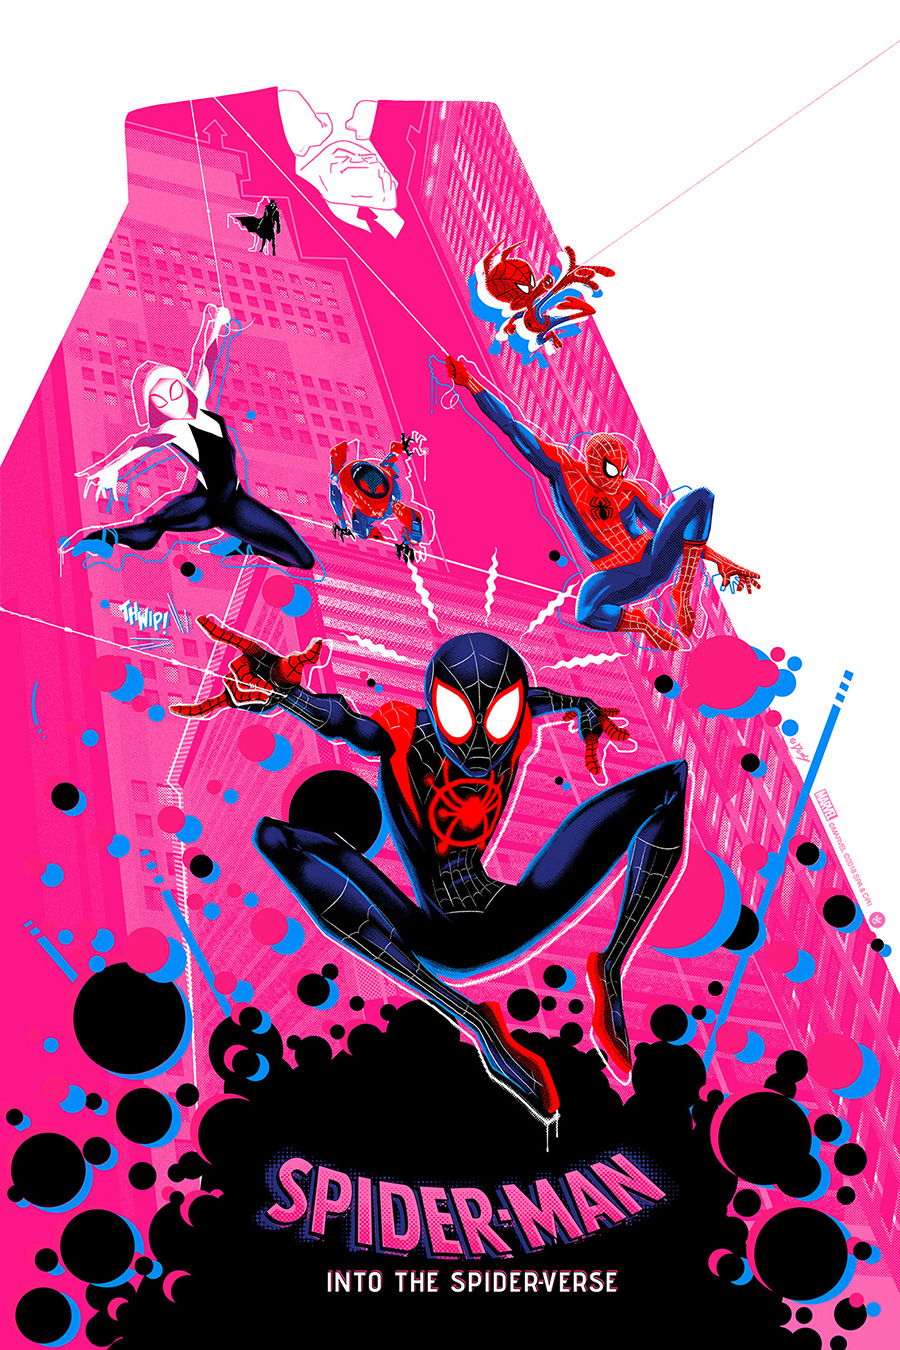 spiderman-into-the-spiderverse-doaly-poster-art